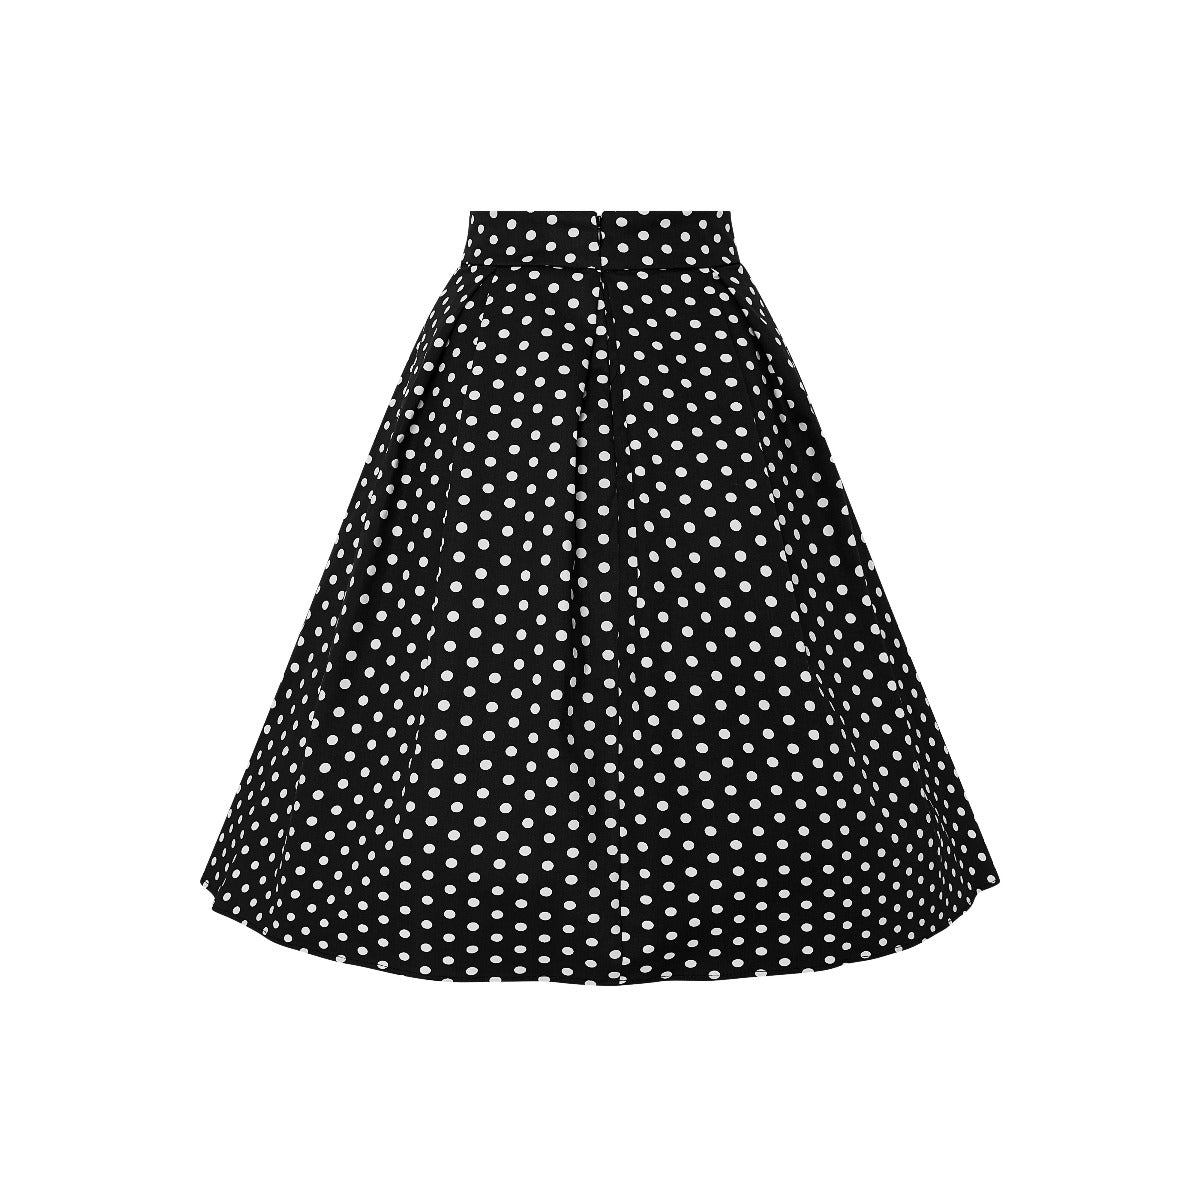 Our high waisted swing skirt, in black, with white polka dots, back view